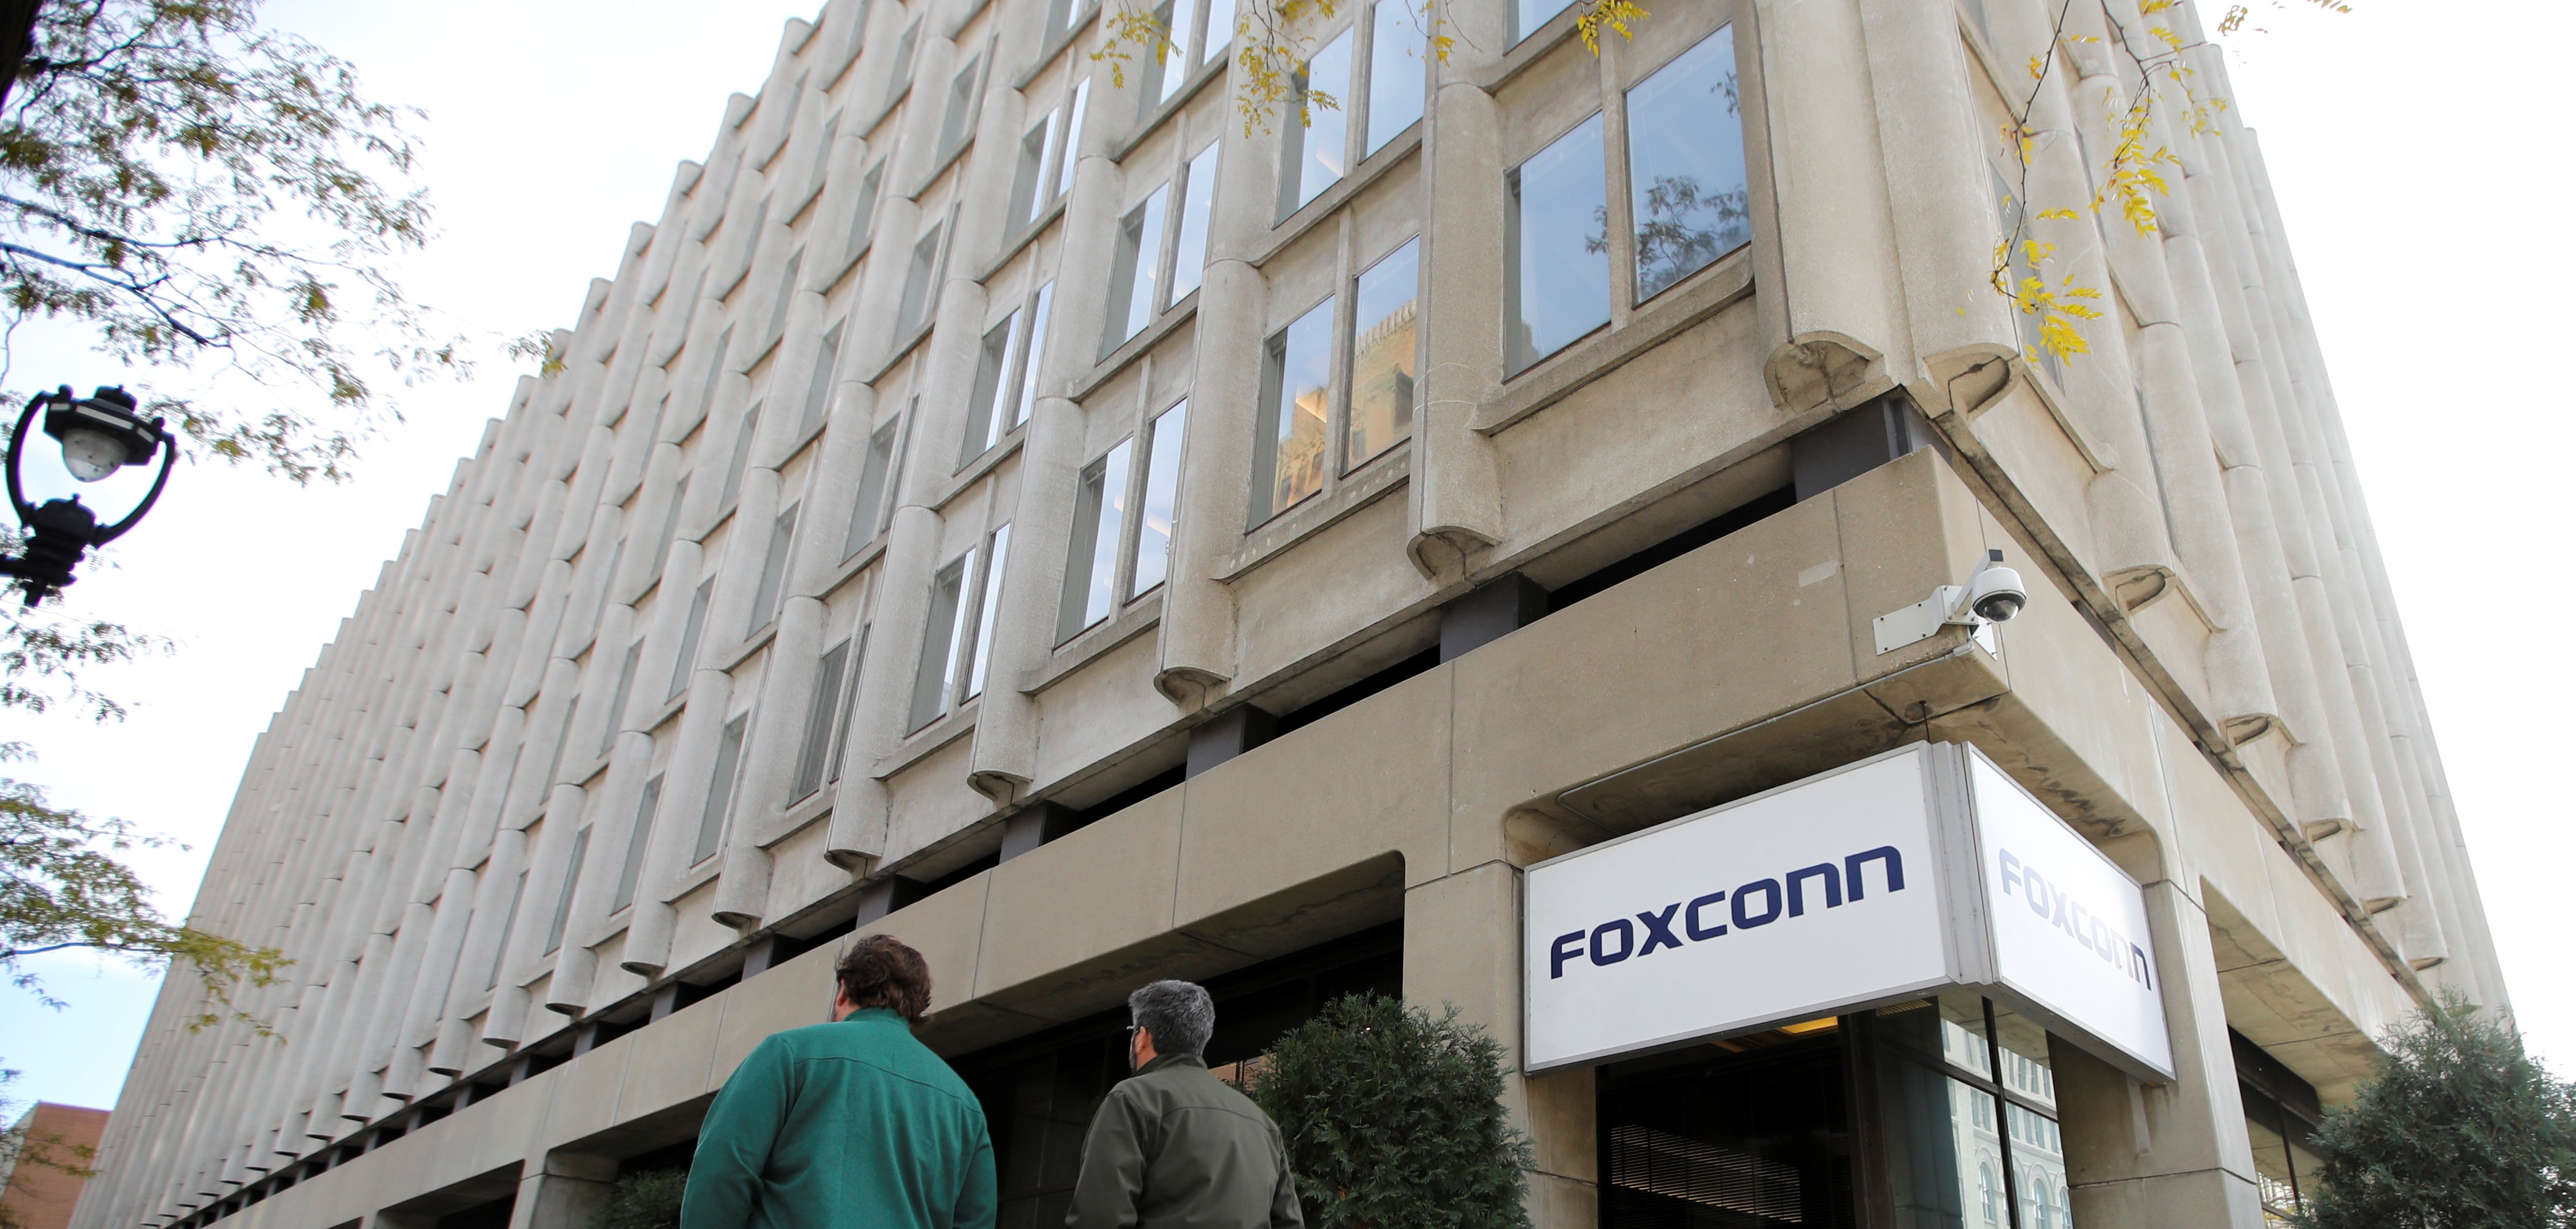 Apple iPhone maker Foxconn approved to resume Shenzhen plant production -source